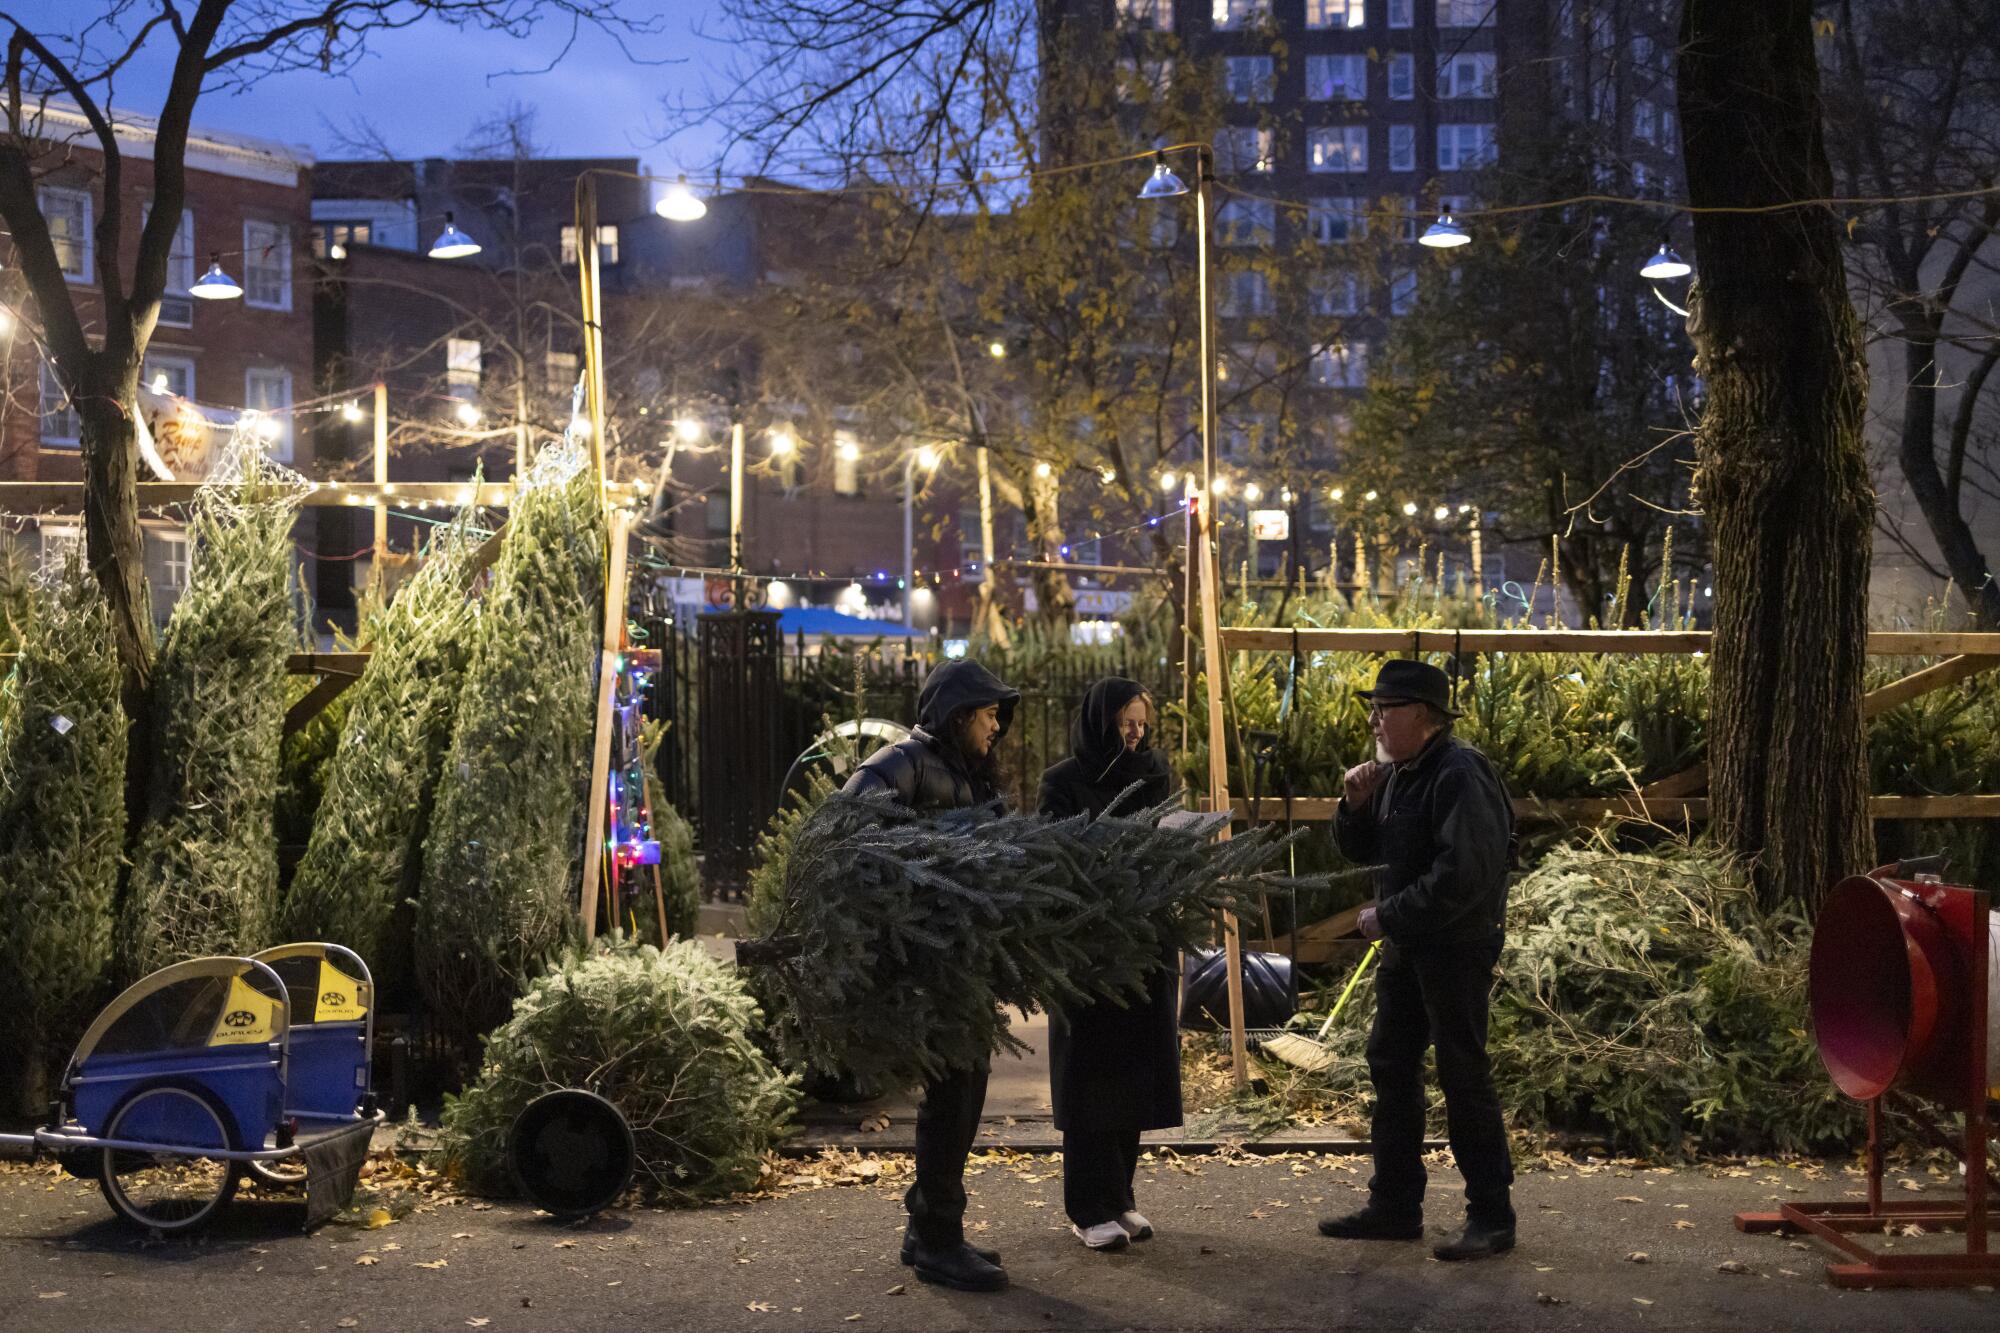 A man talks to two people carrying a Christmas tree outside a tree lot on a sidewalk.